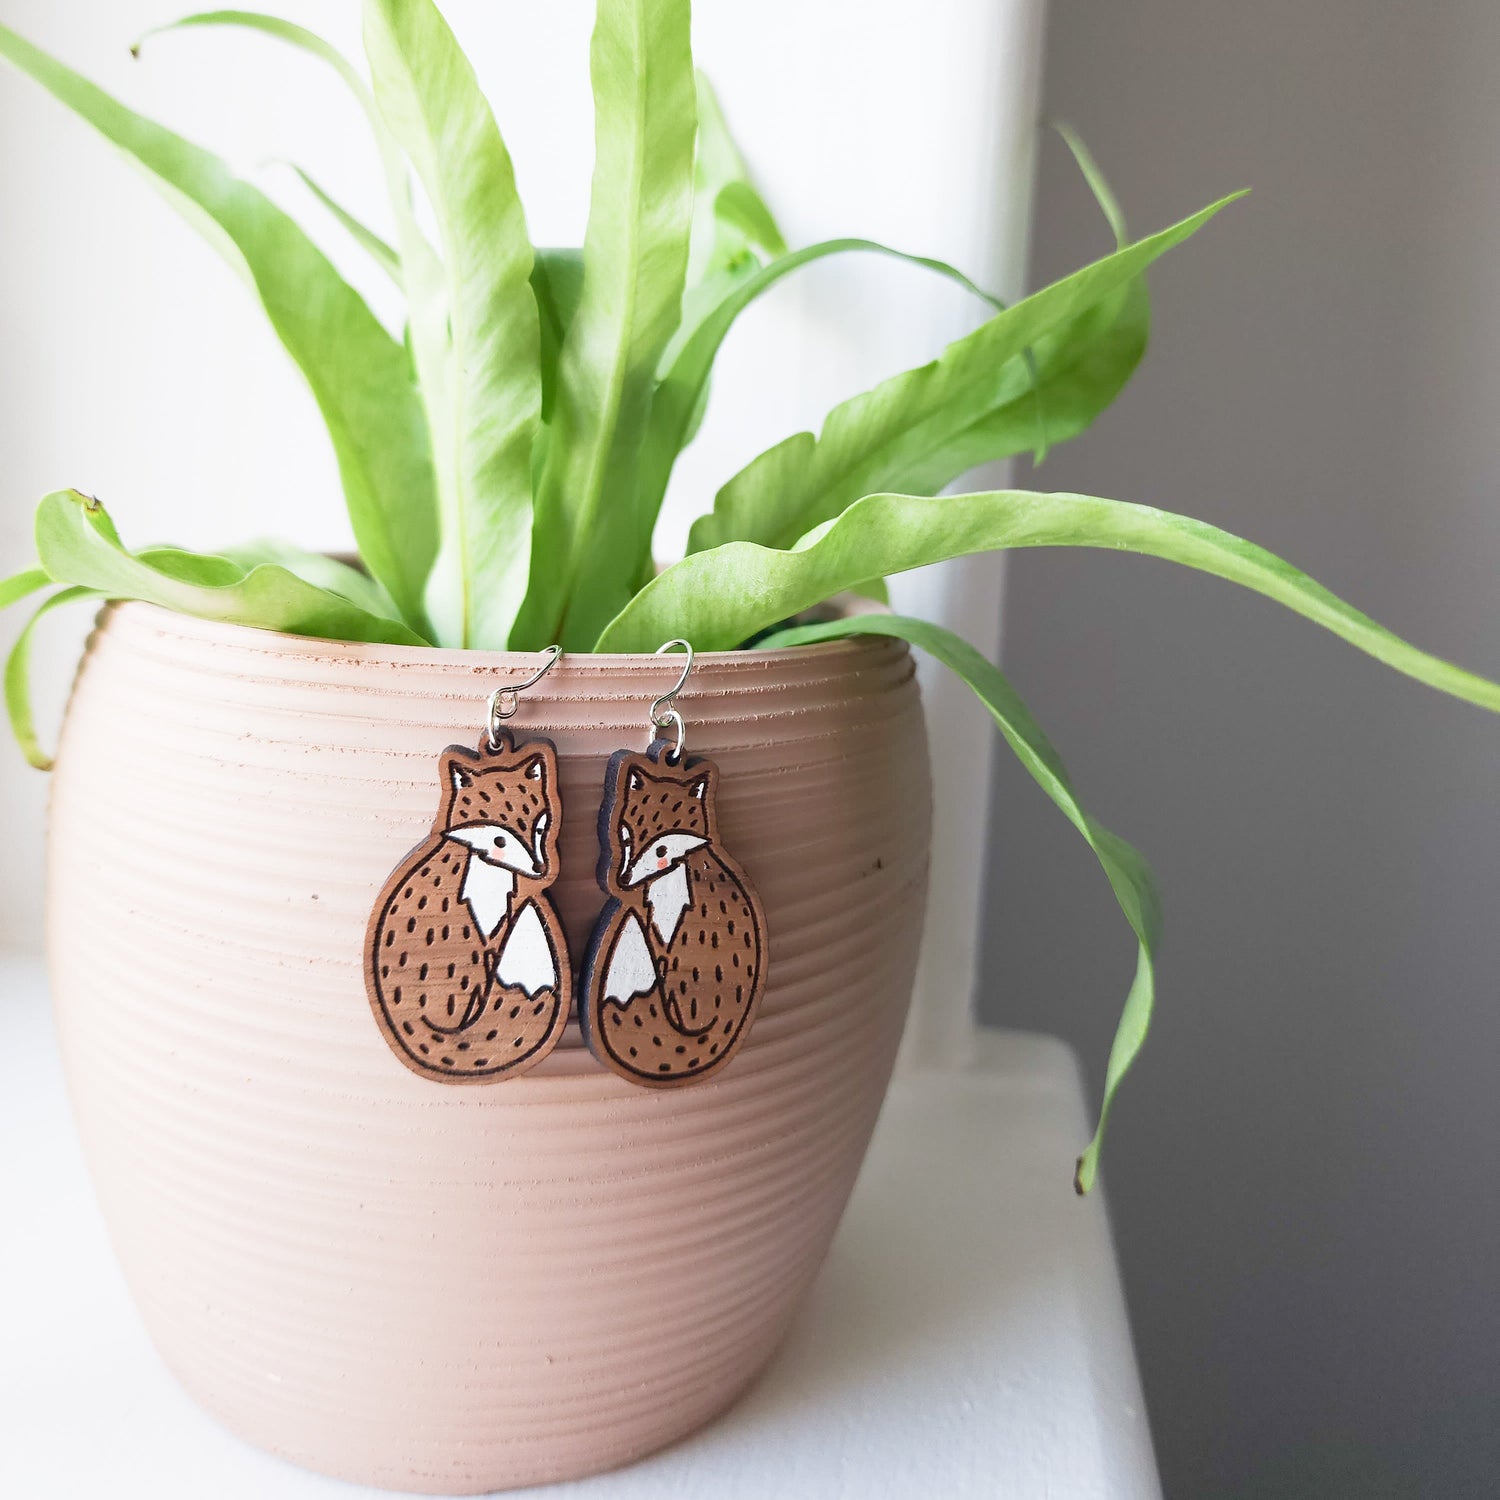 fox dangle earrings hanging off of a potted plant